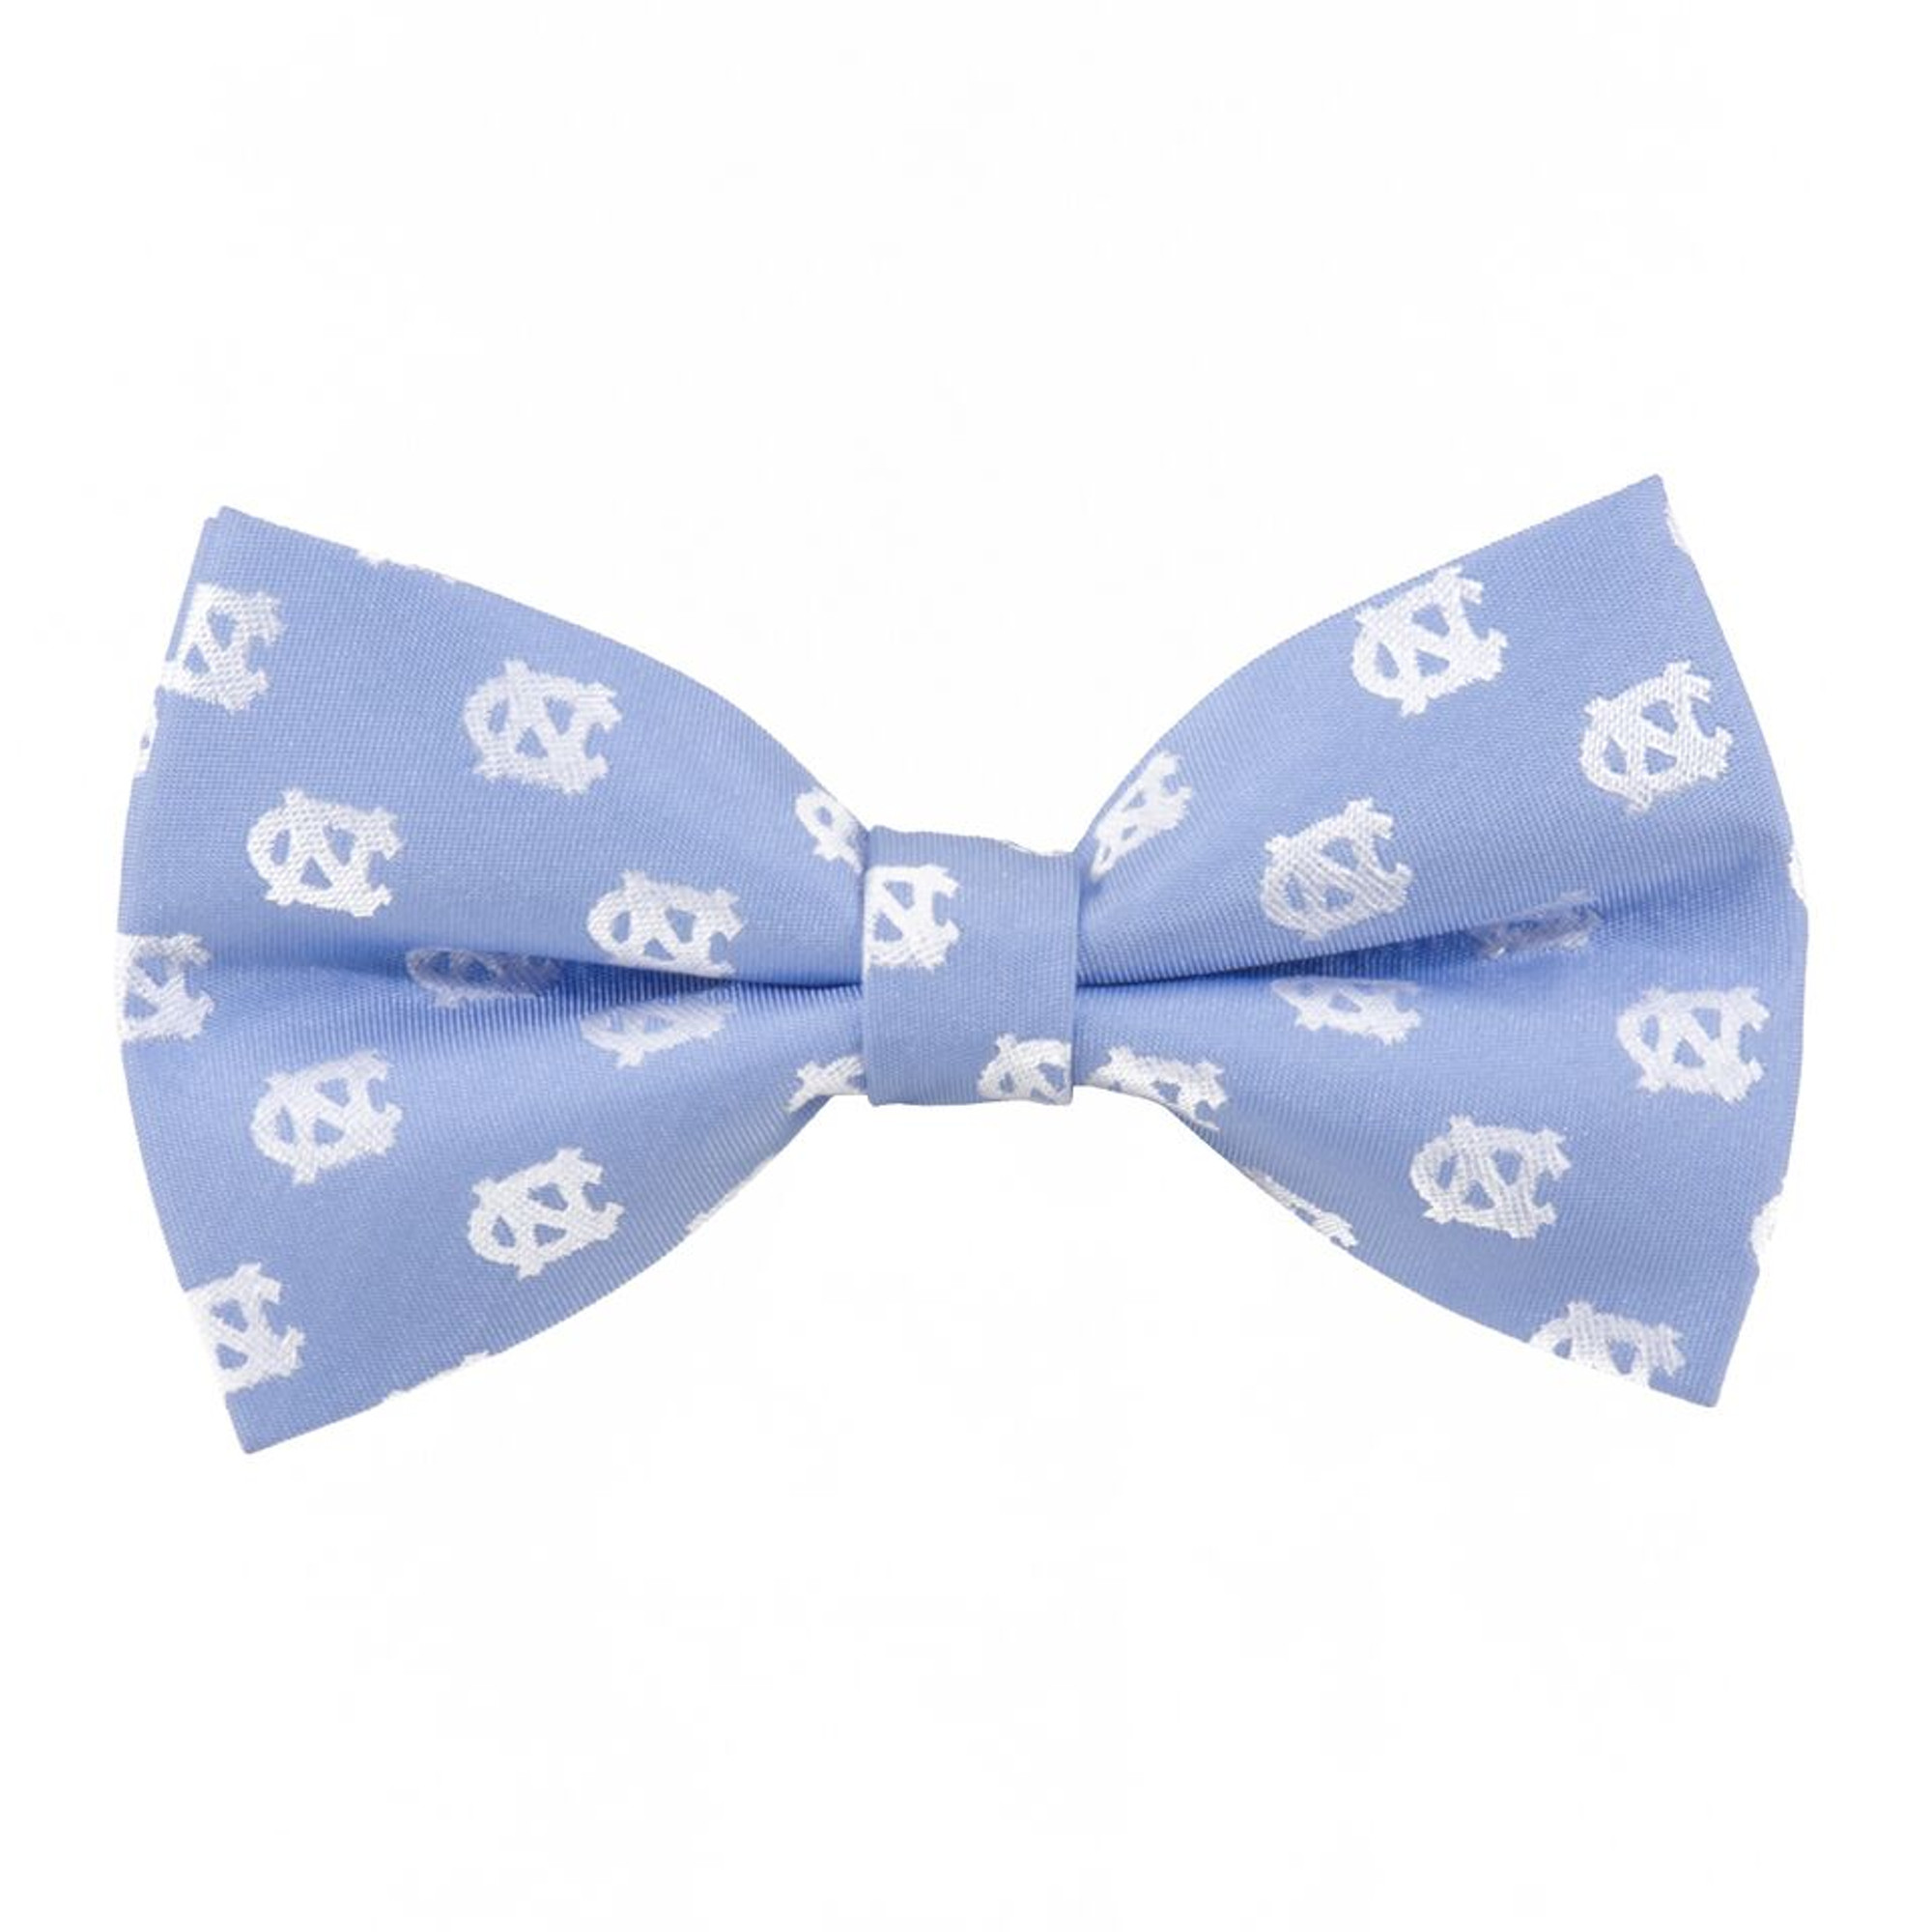 Eagles Wings University of Texas Oxford Bow Tie